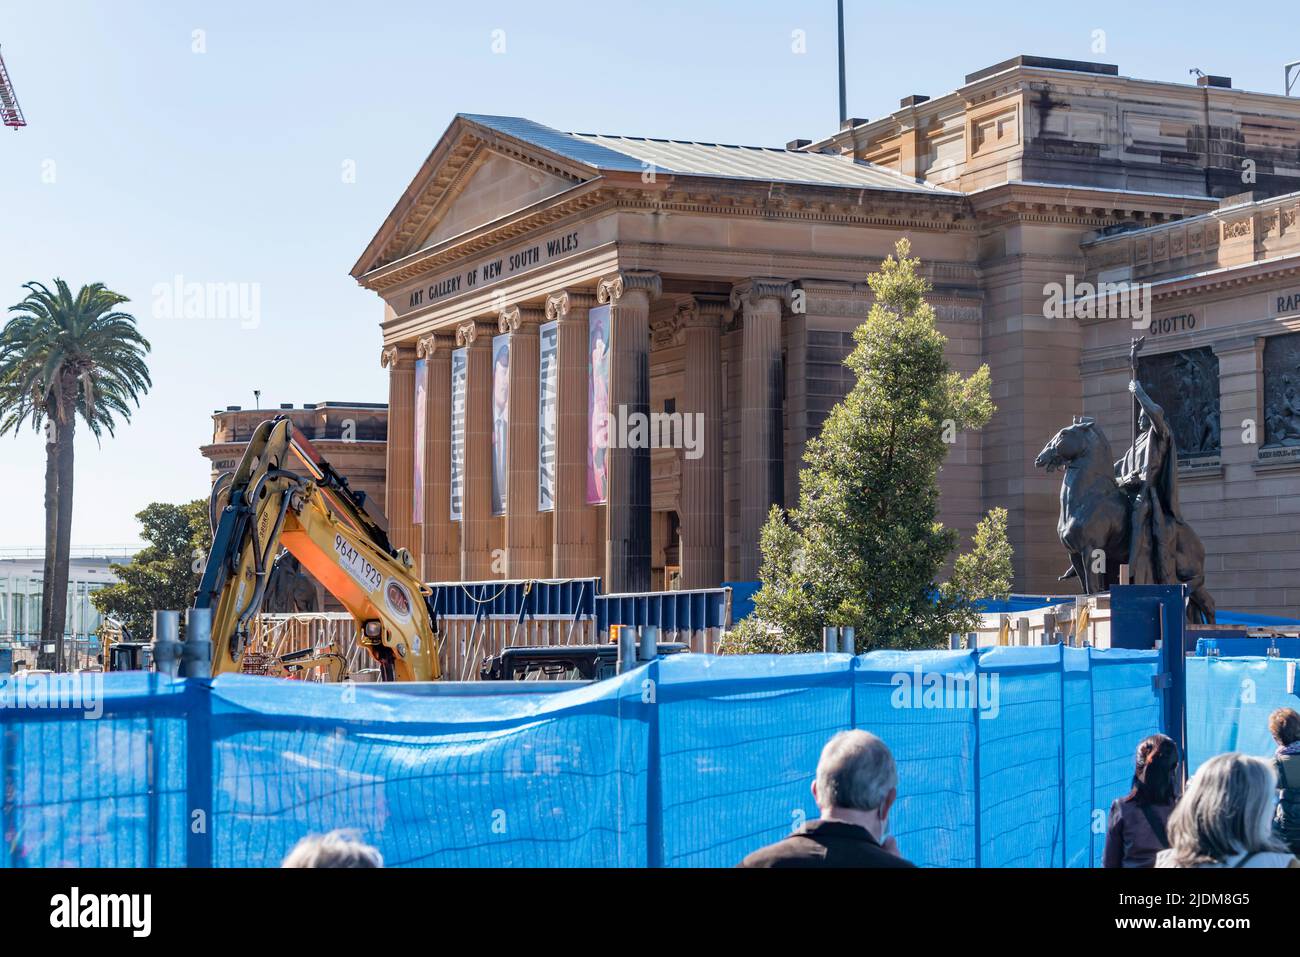 June 22, 2022 Sydney, Australia: The entry to the Art Gallery of New South Wales in Sydney City is surrounded by safety fences and construction works Stock Photo